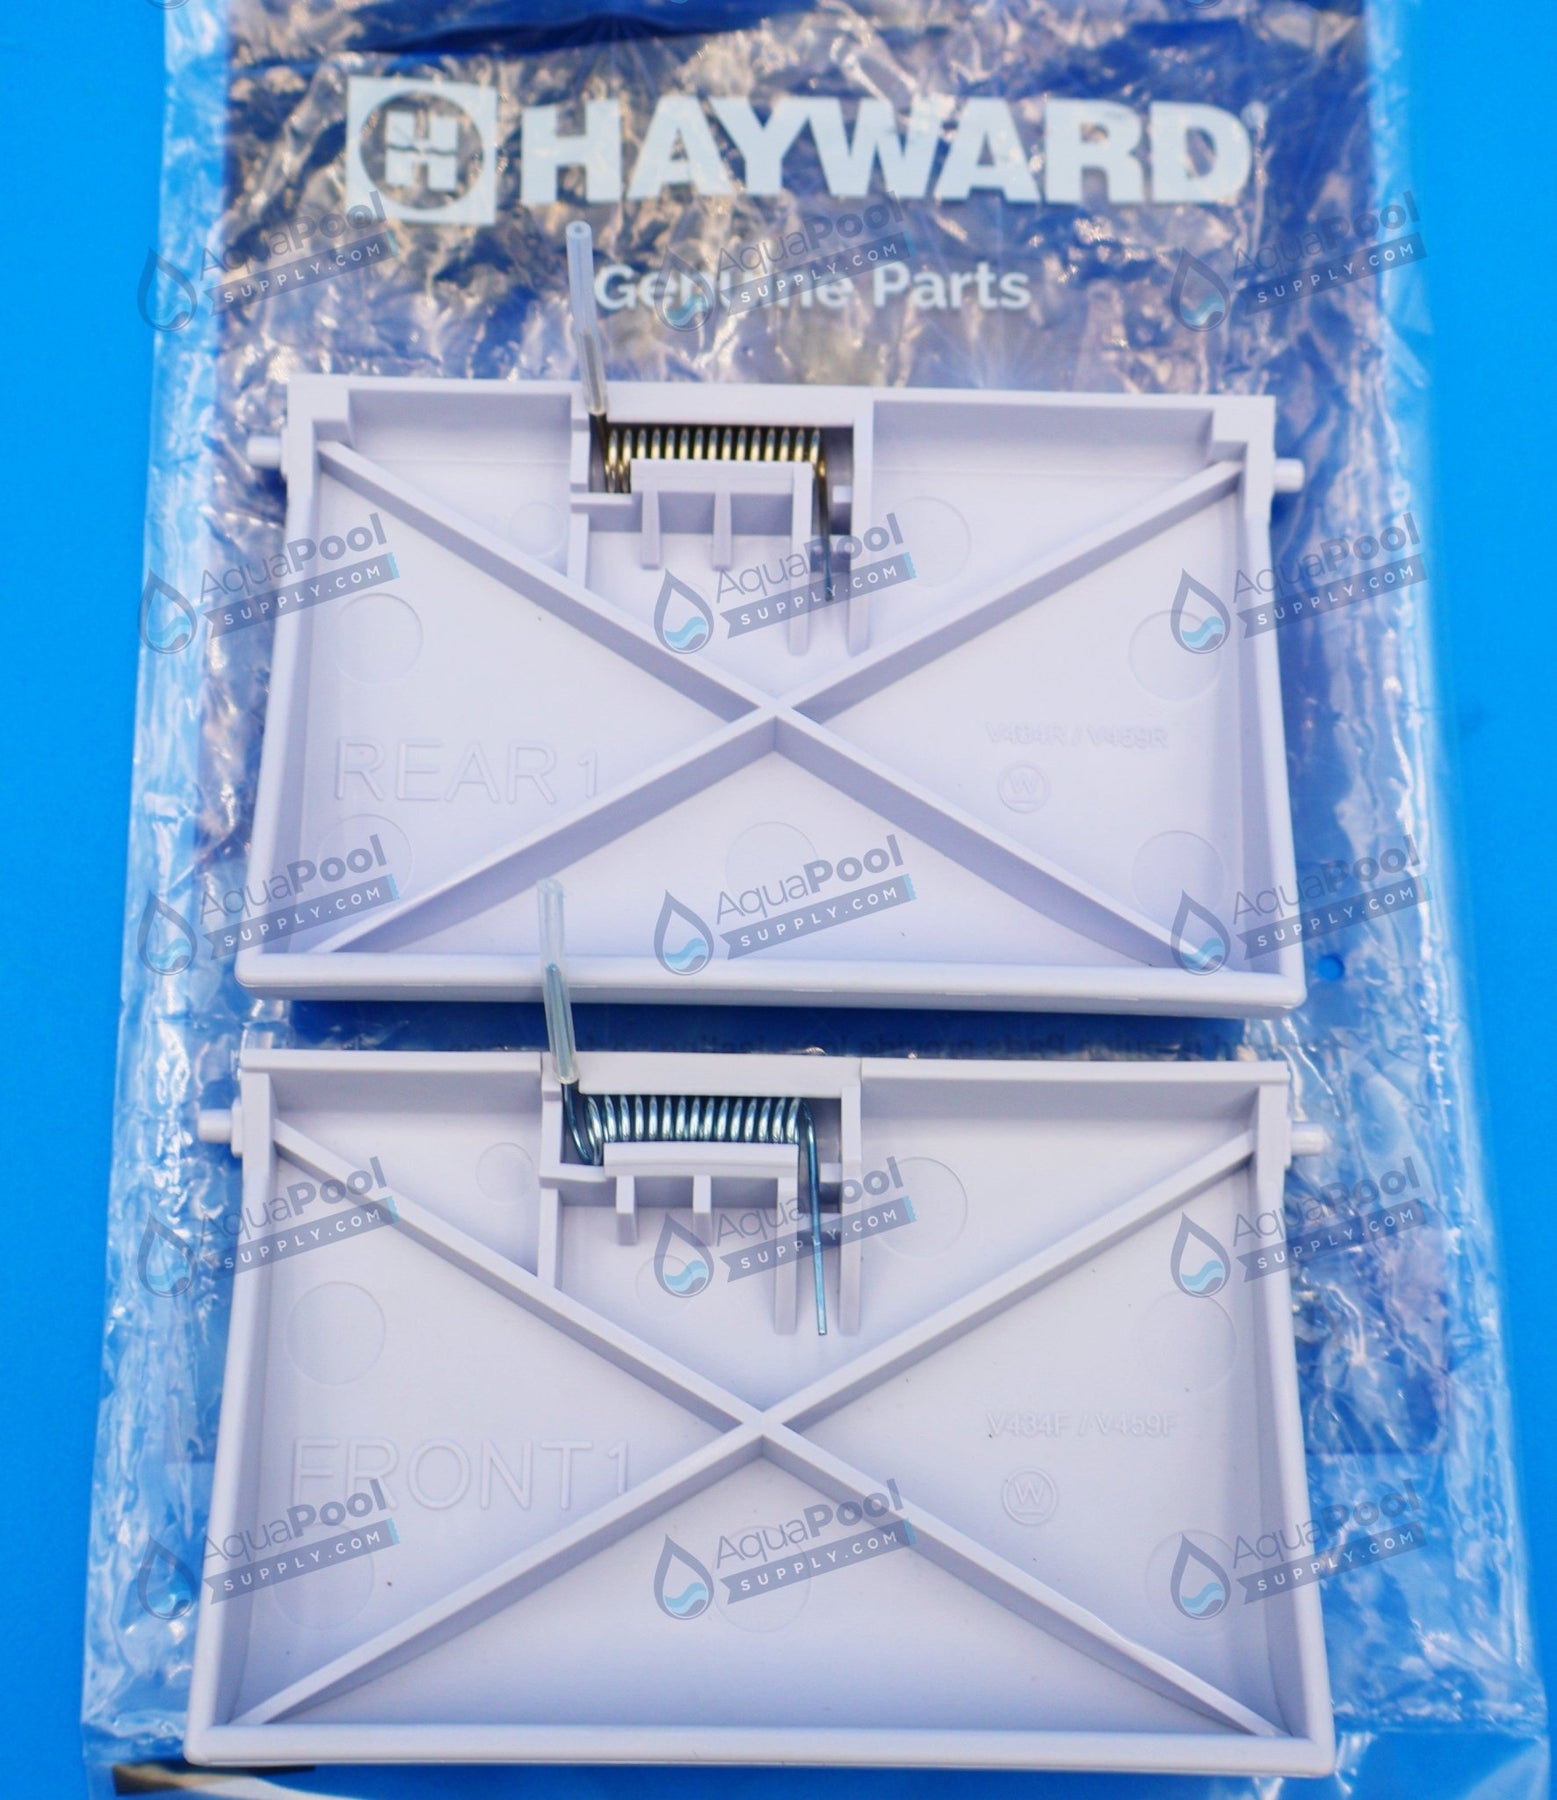 Hayward Flap Kit for PoolVac/Navigator V-Flex - Includes 2 Flaps and Front-Rear Springs AXV434-237 - img-2